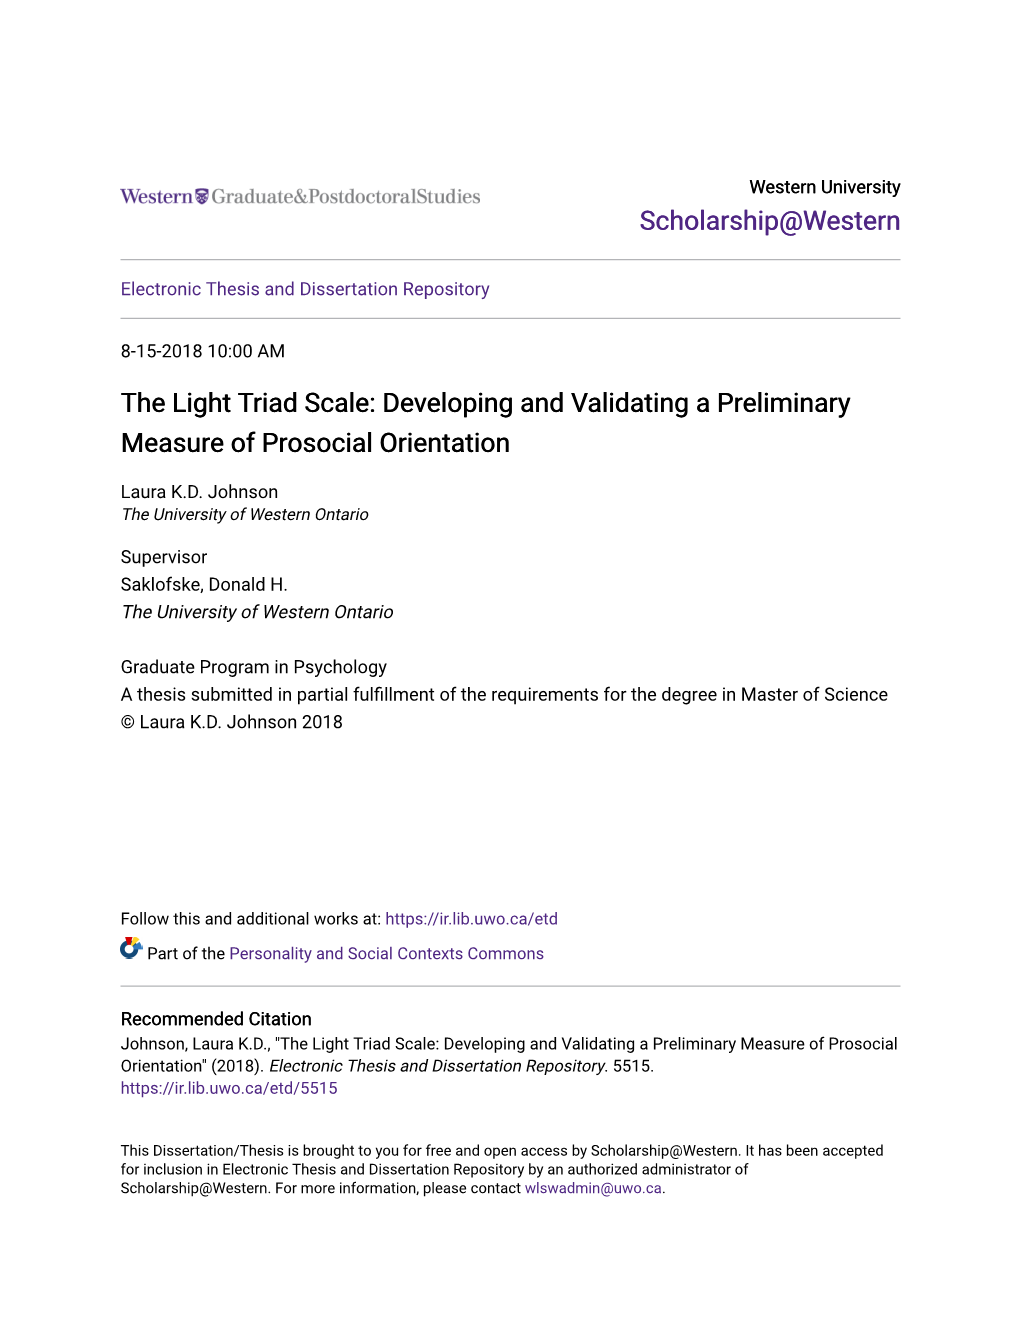 The Light Triad Scale: Developing and Validating a Preliminary Measure of Prosocial Orientation